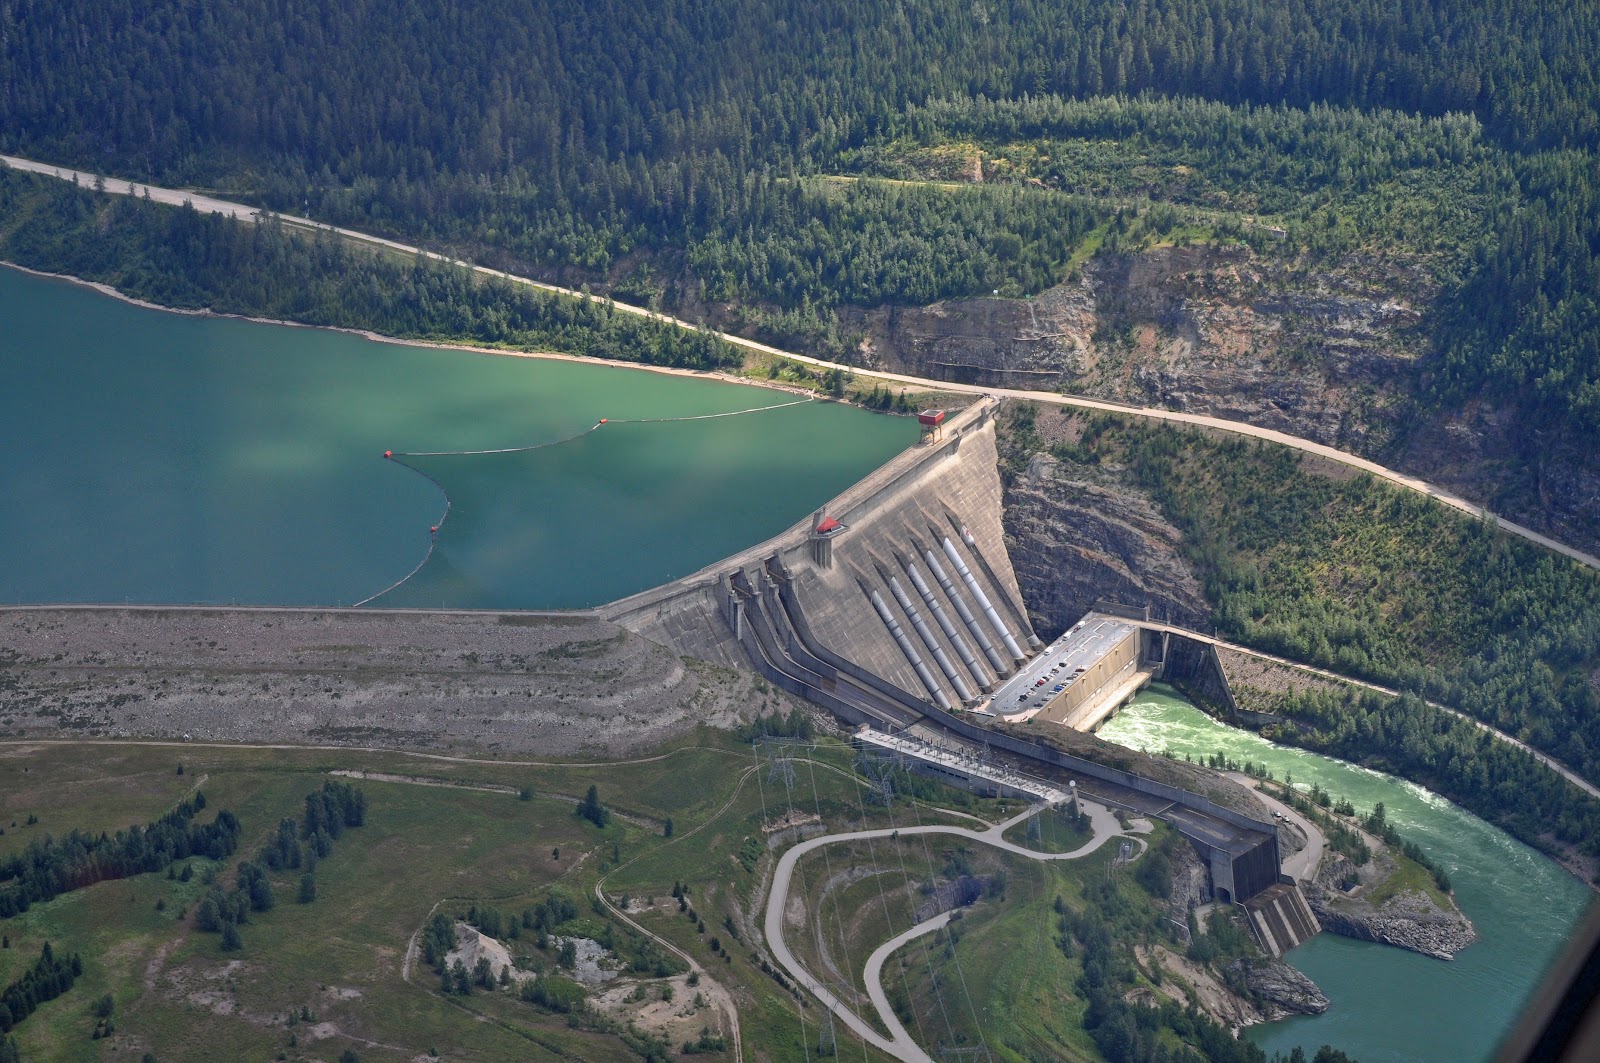 bc-s-hydro-dams-a-giant-battery-2017-events-vancouver-island